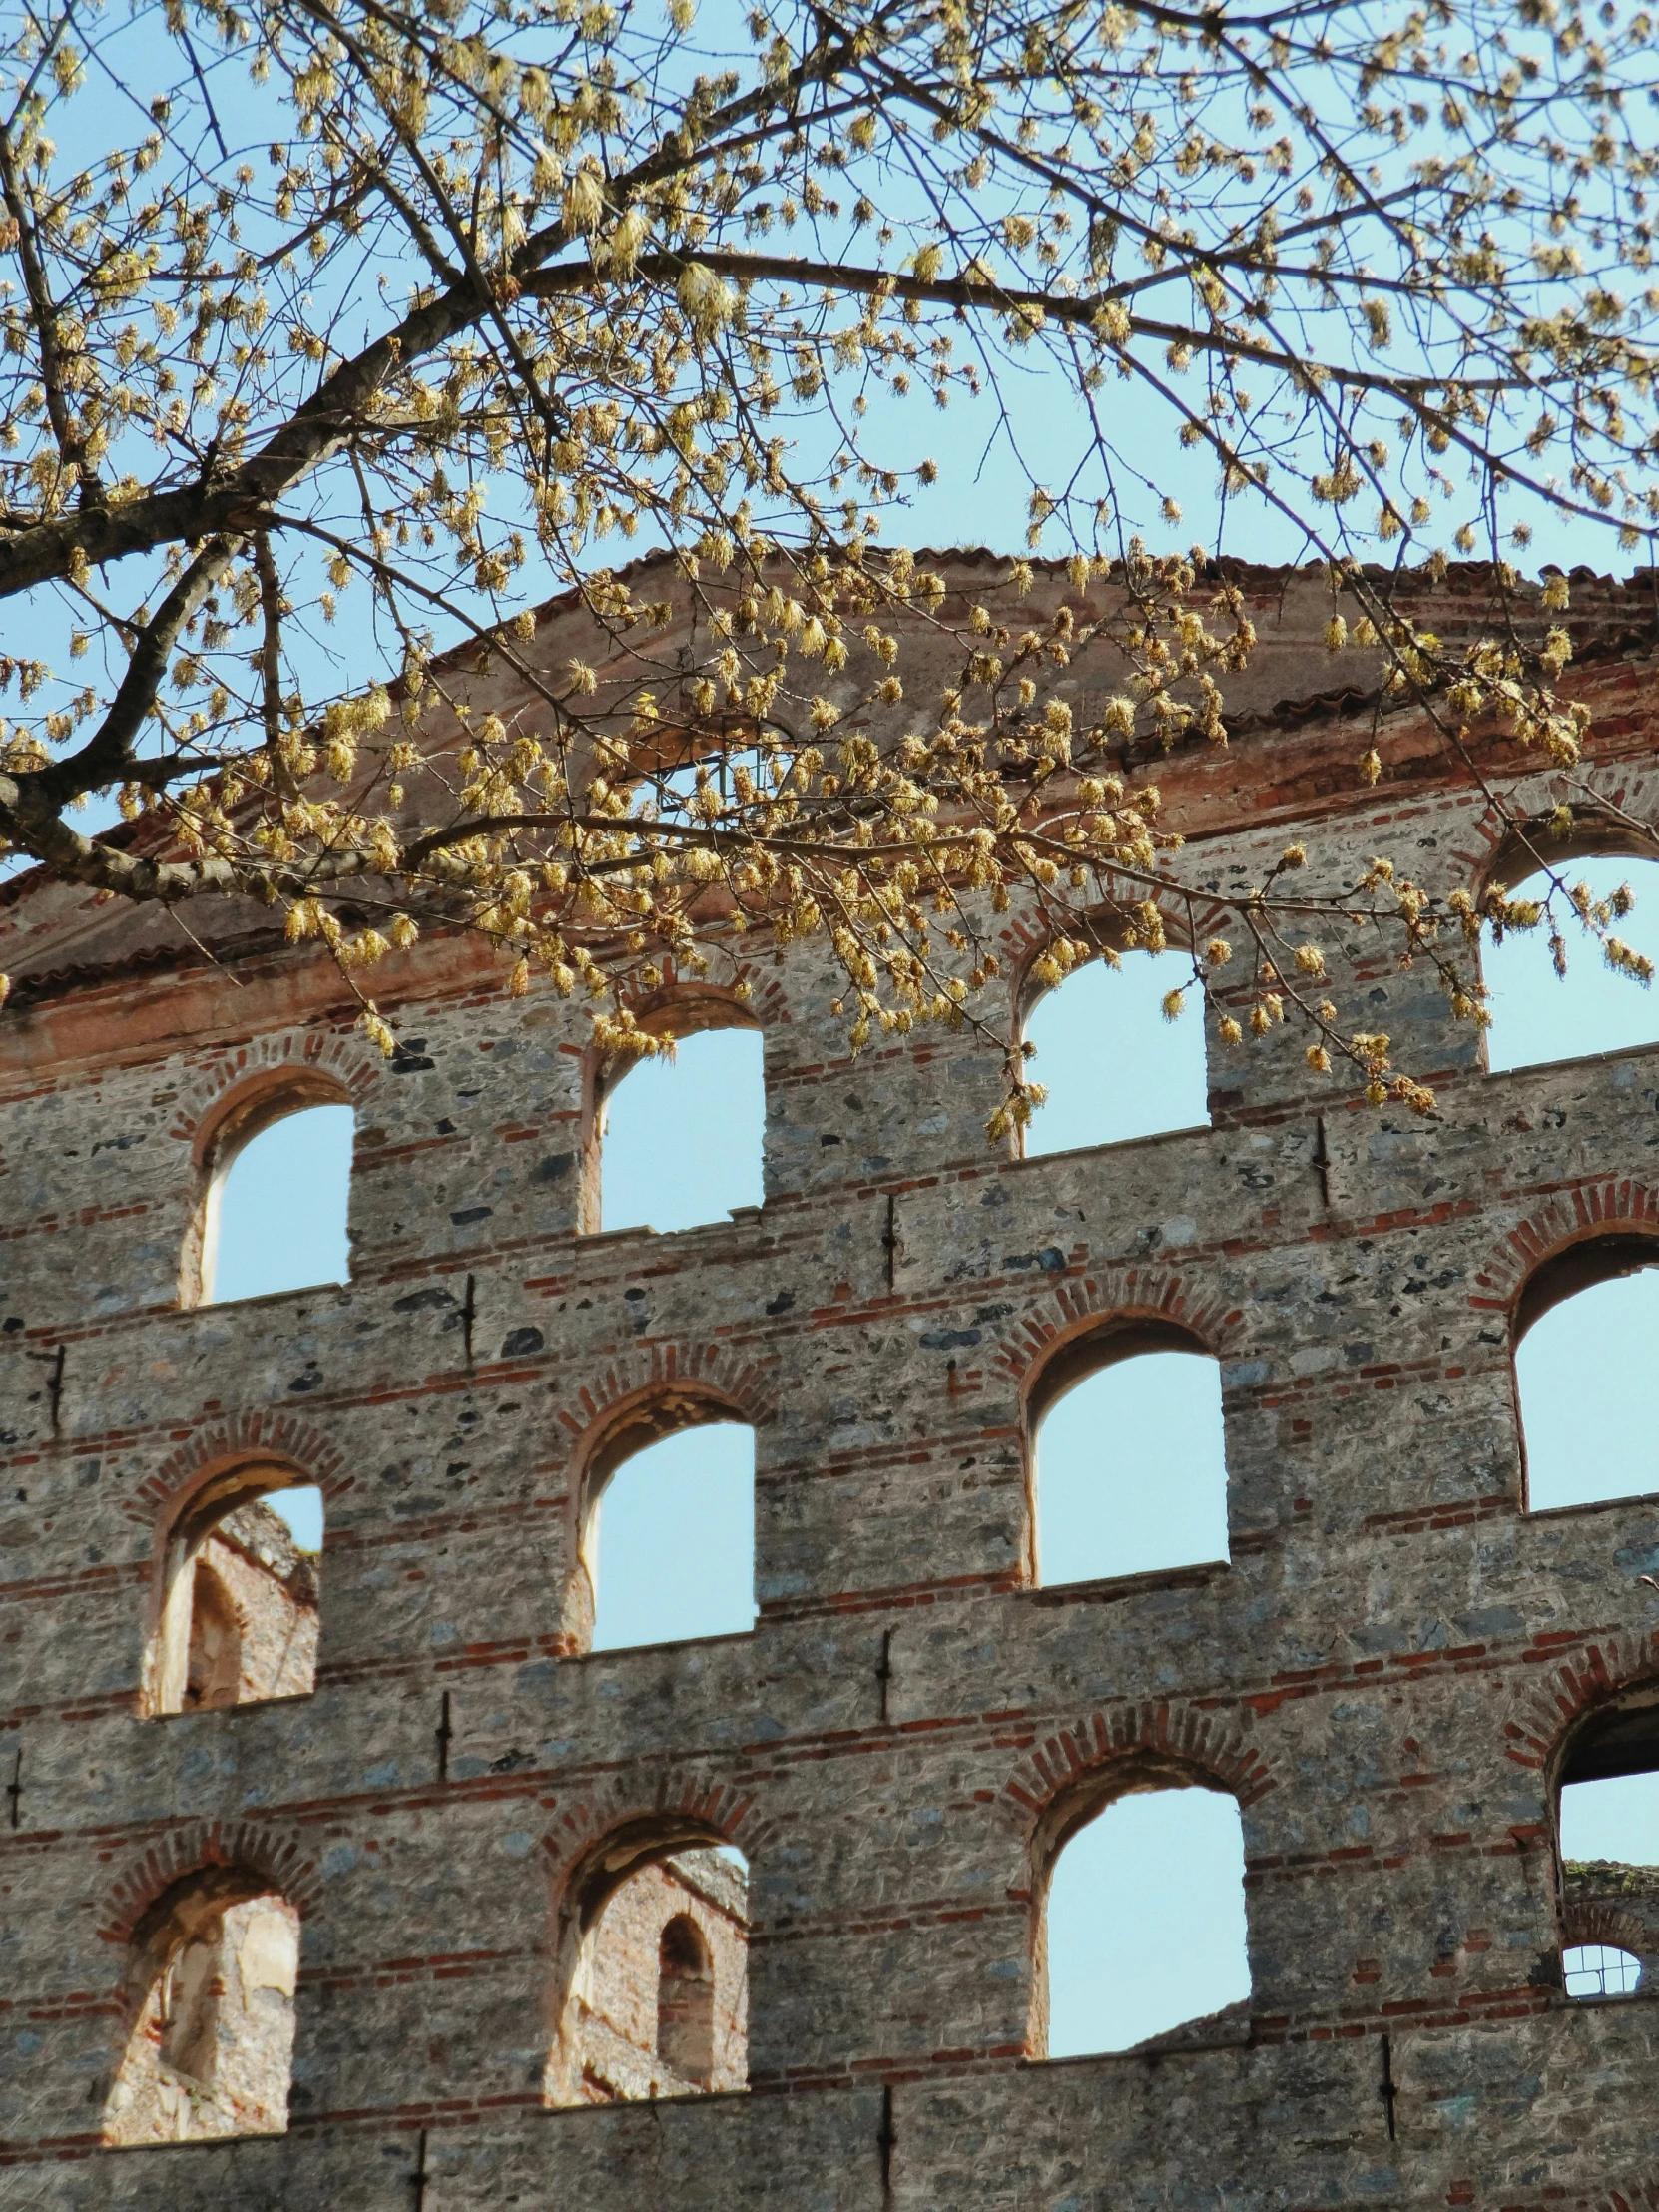 the windows of an old brick building are clearly visible